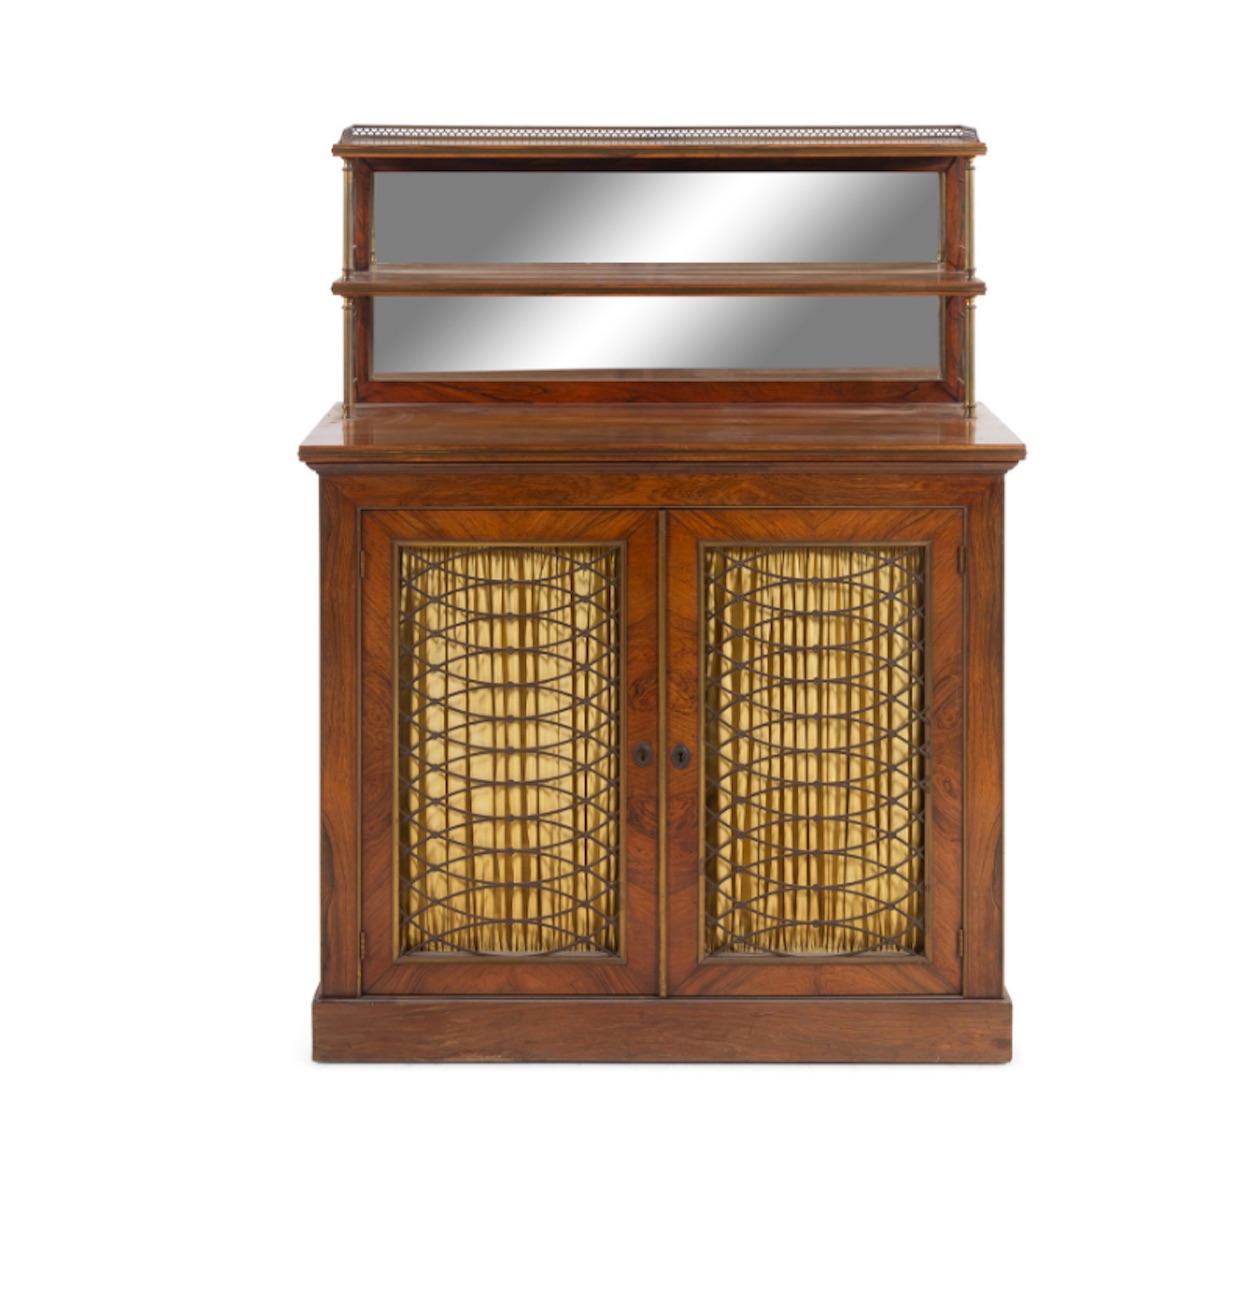 Elegant Regency rosewood chiffonier, great form and proportions. Two shelves with mirror back plate over two doors with brass grills. Great color and patination.